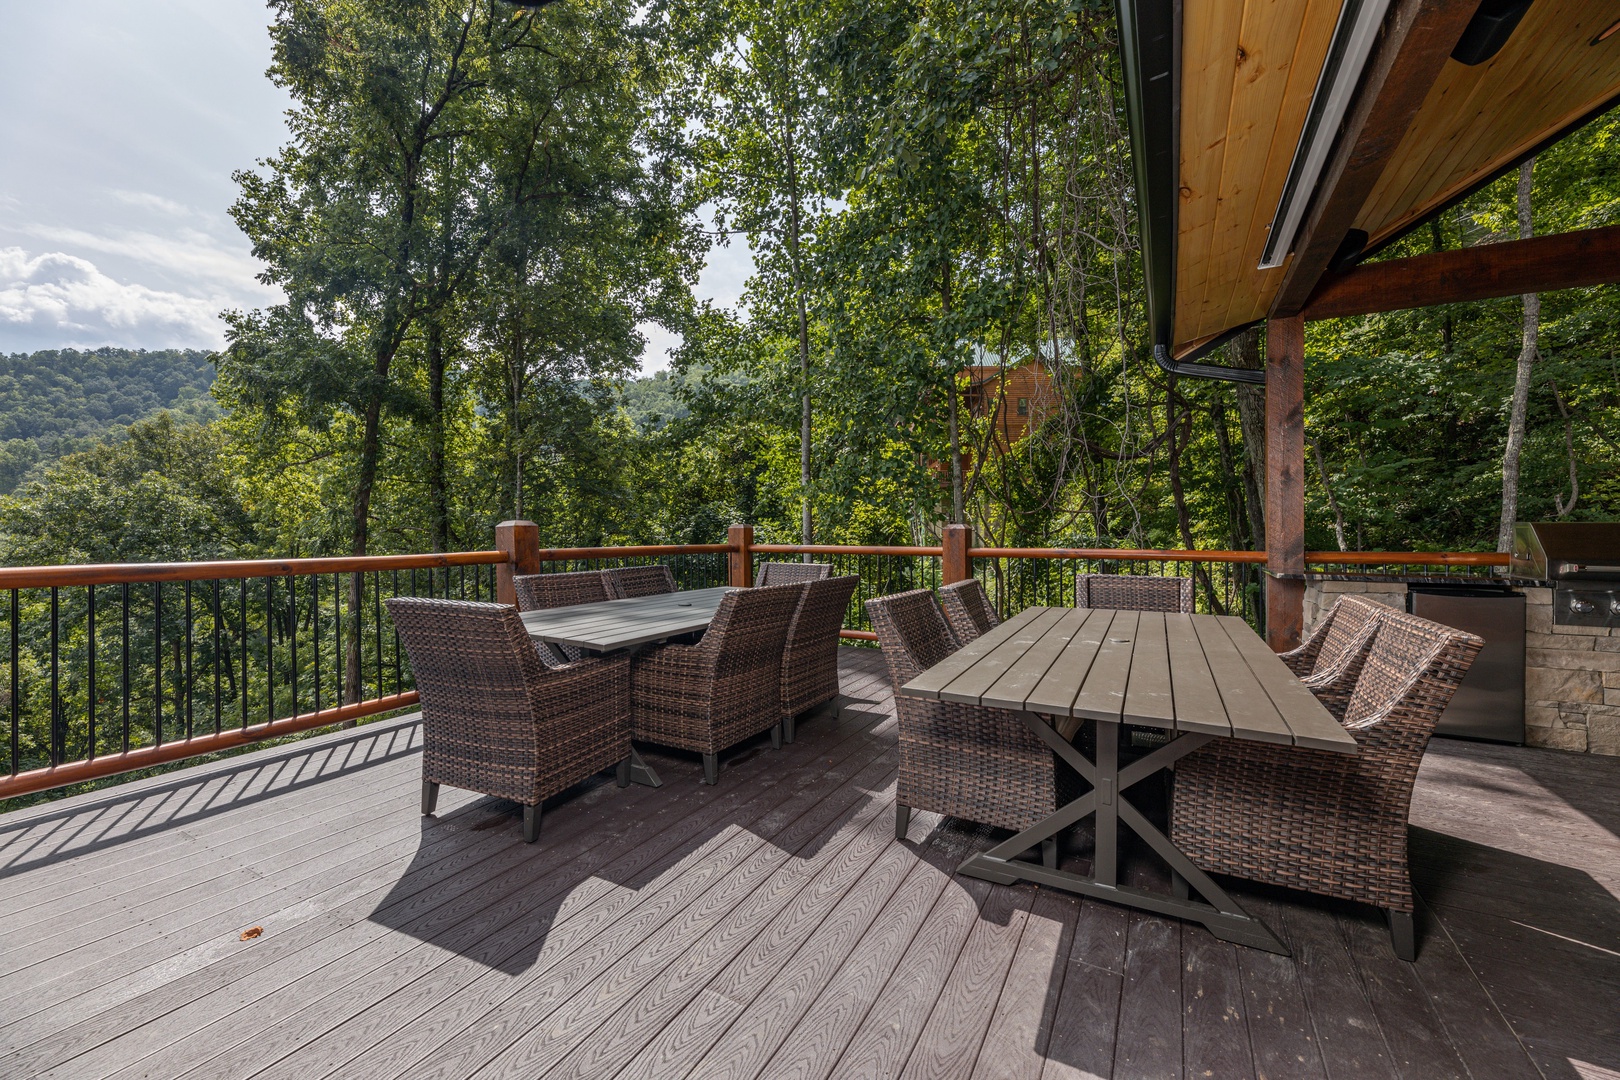 Outdoor dining tables at Black Bears & Biscuits Lodge, a 6 bedroom cabin rental located in Pigeon Forge